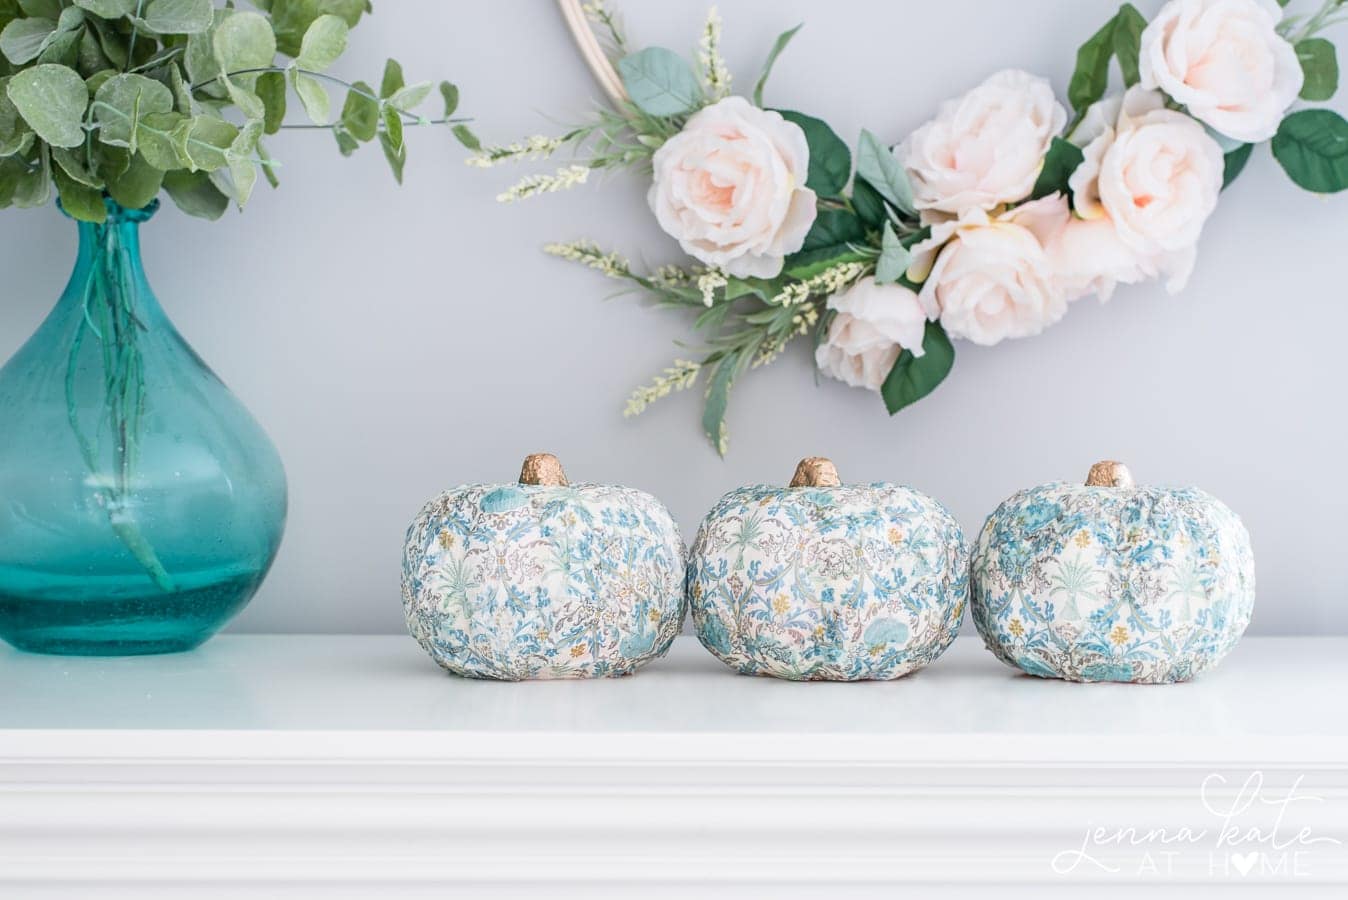 Three pumpkins of the same size, wrapped in vintage patterned paper, near a clear blue vase of greenery and in front of a light pink floral wreath 